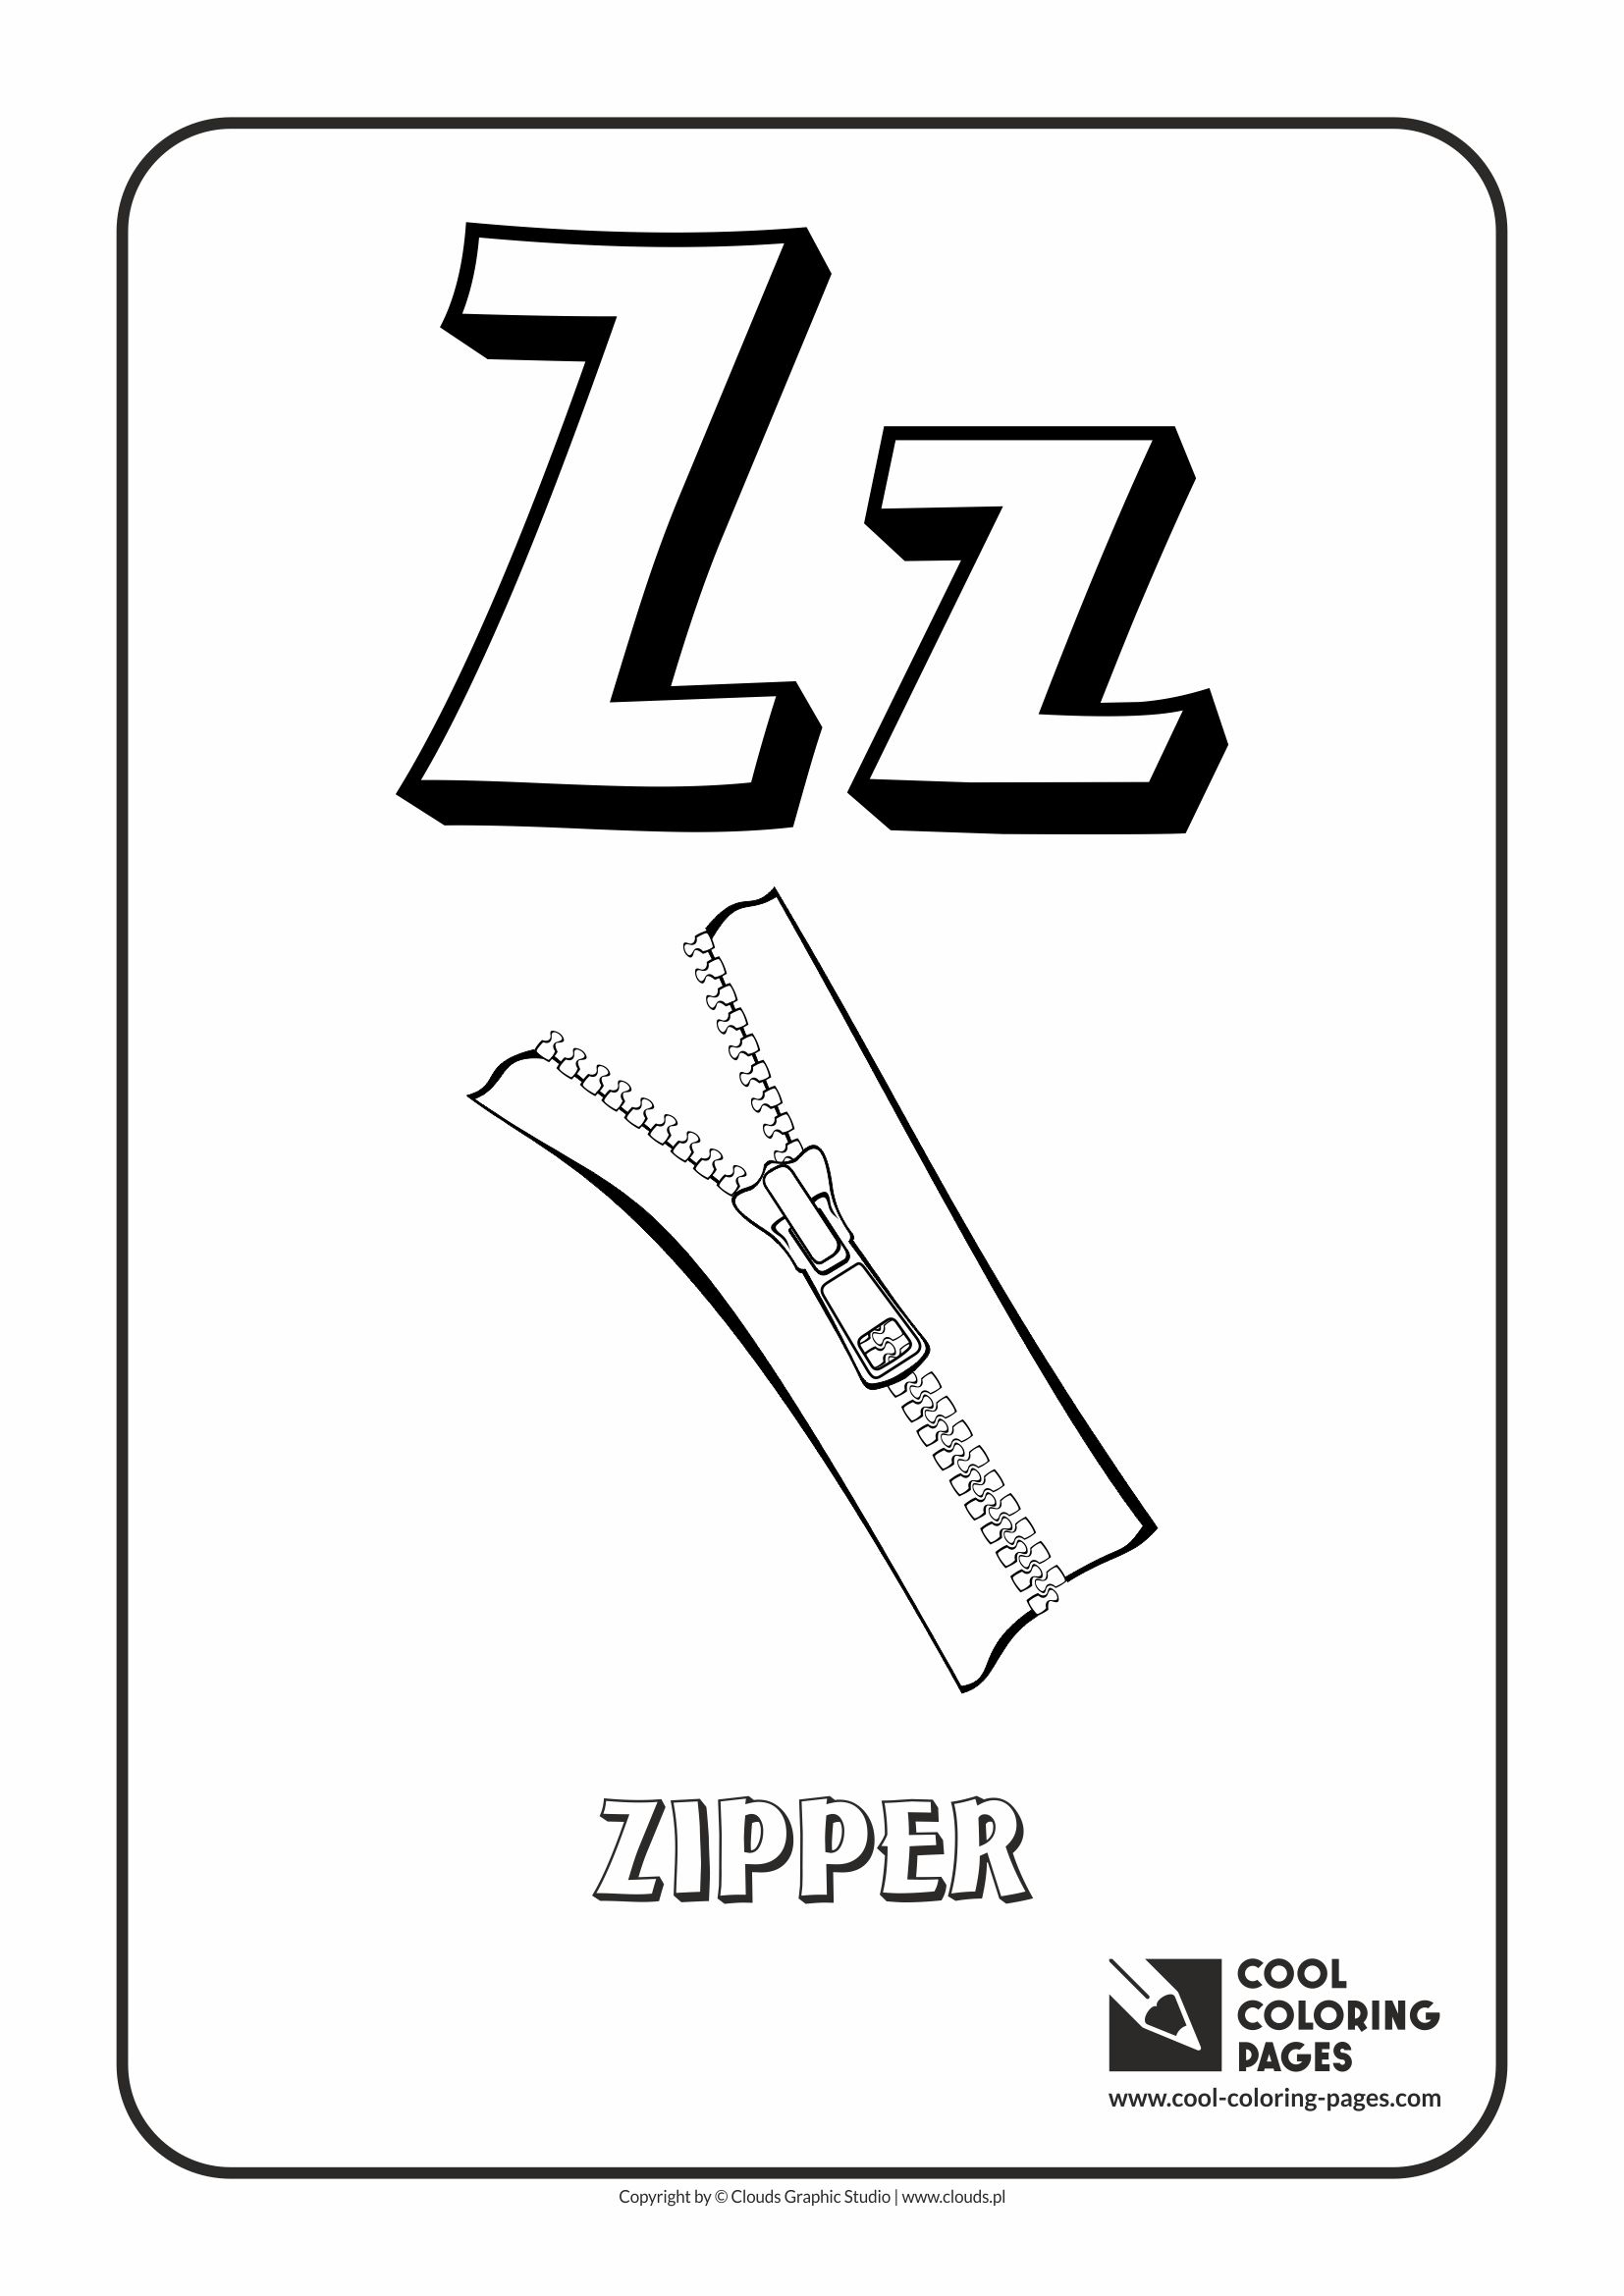 Cool Coloring Pages - Alphabet / Letter Z / Coloring page with letter Z